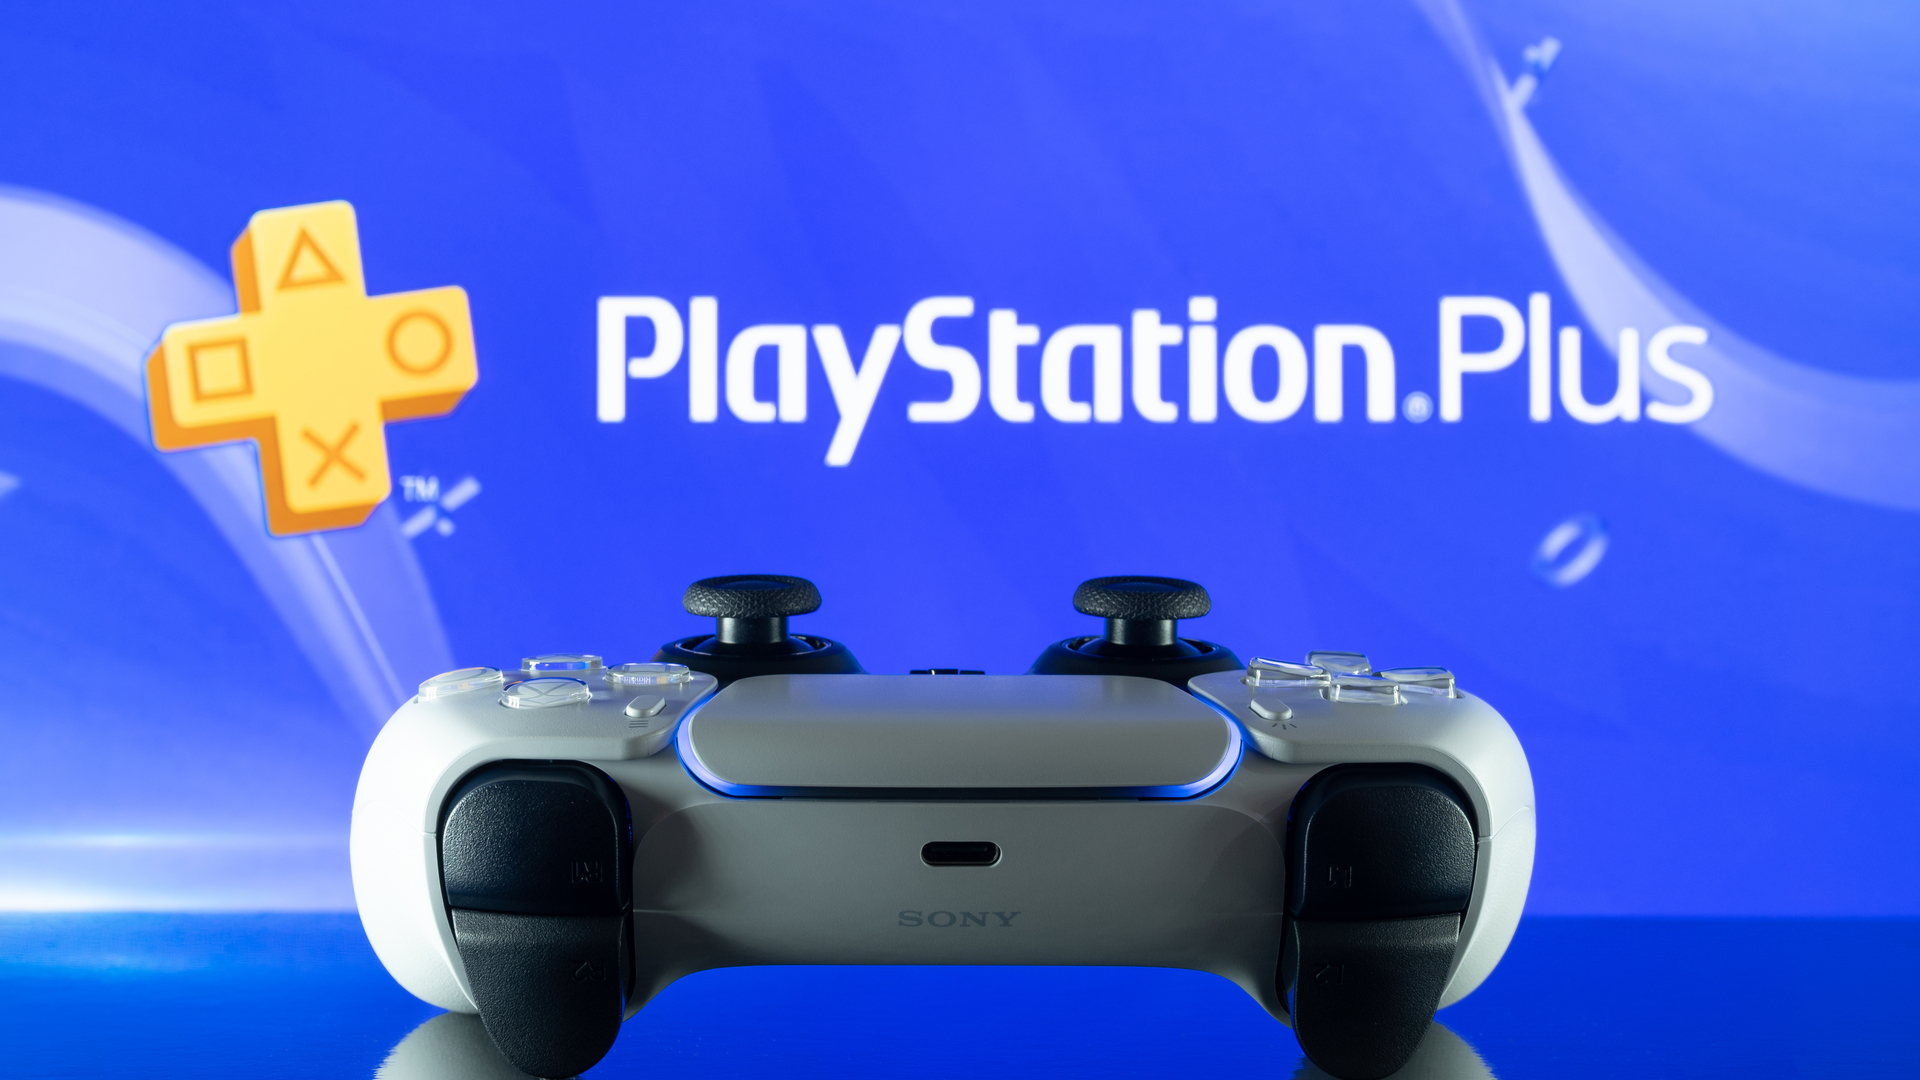 DualSense PS5 controller in front of the PlayStation Plus logo